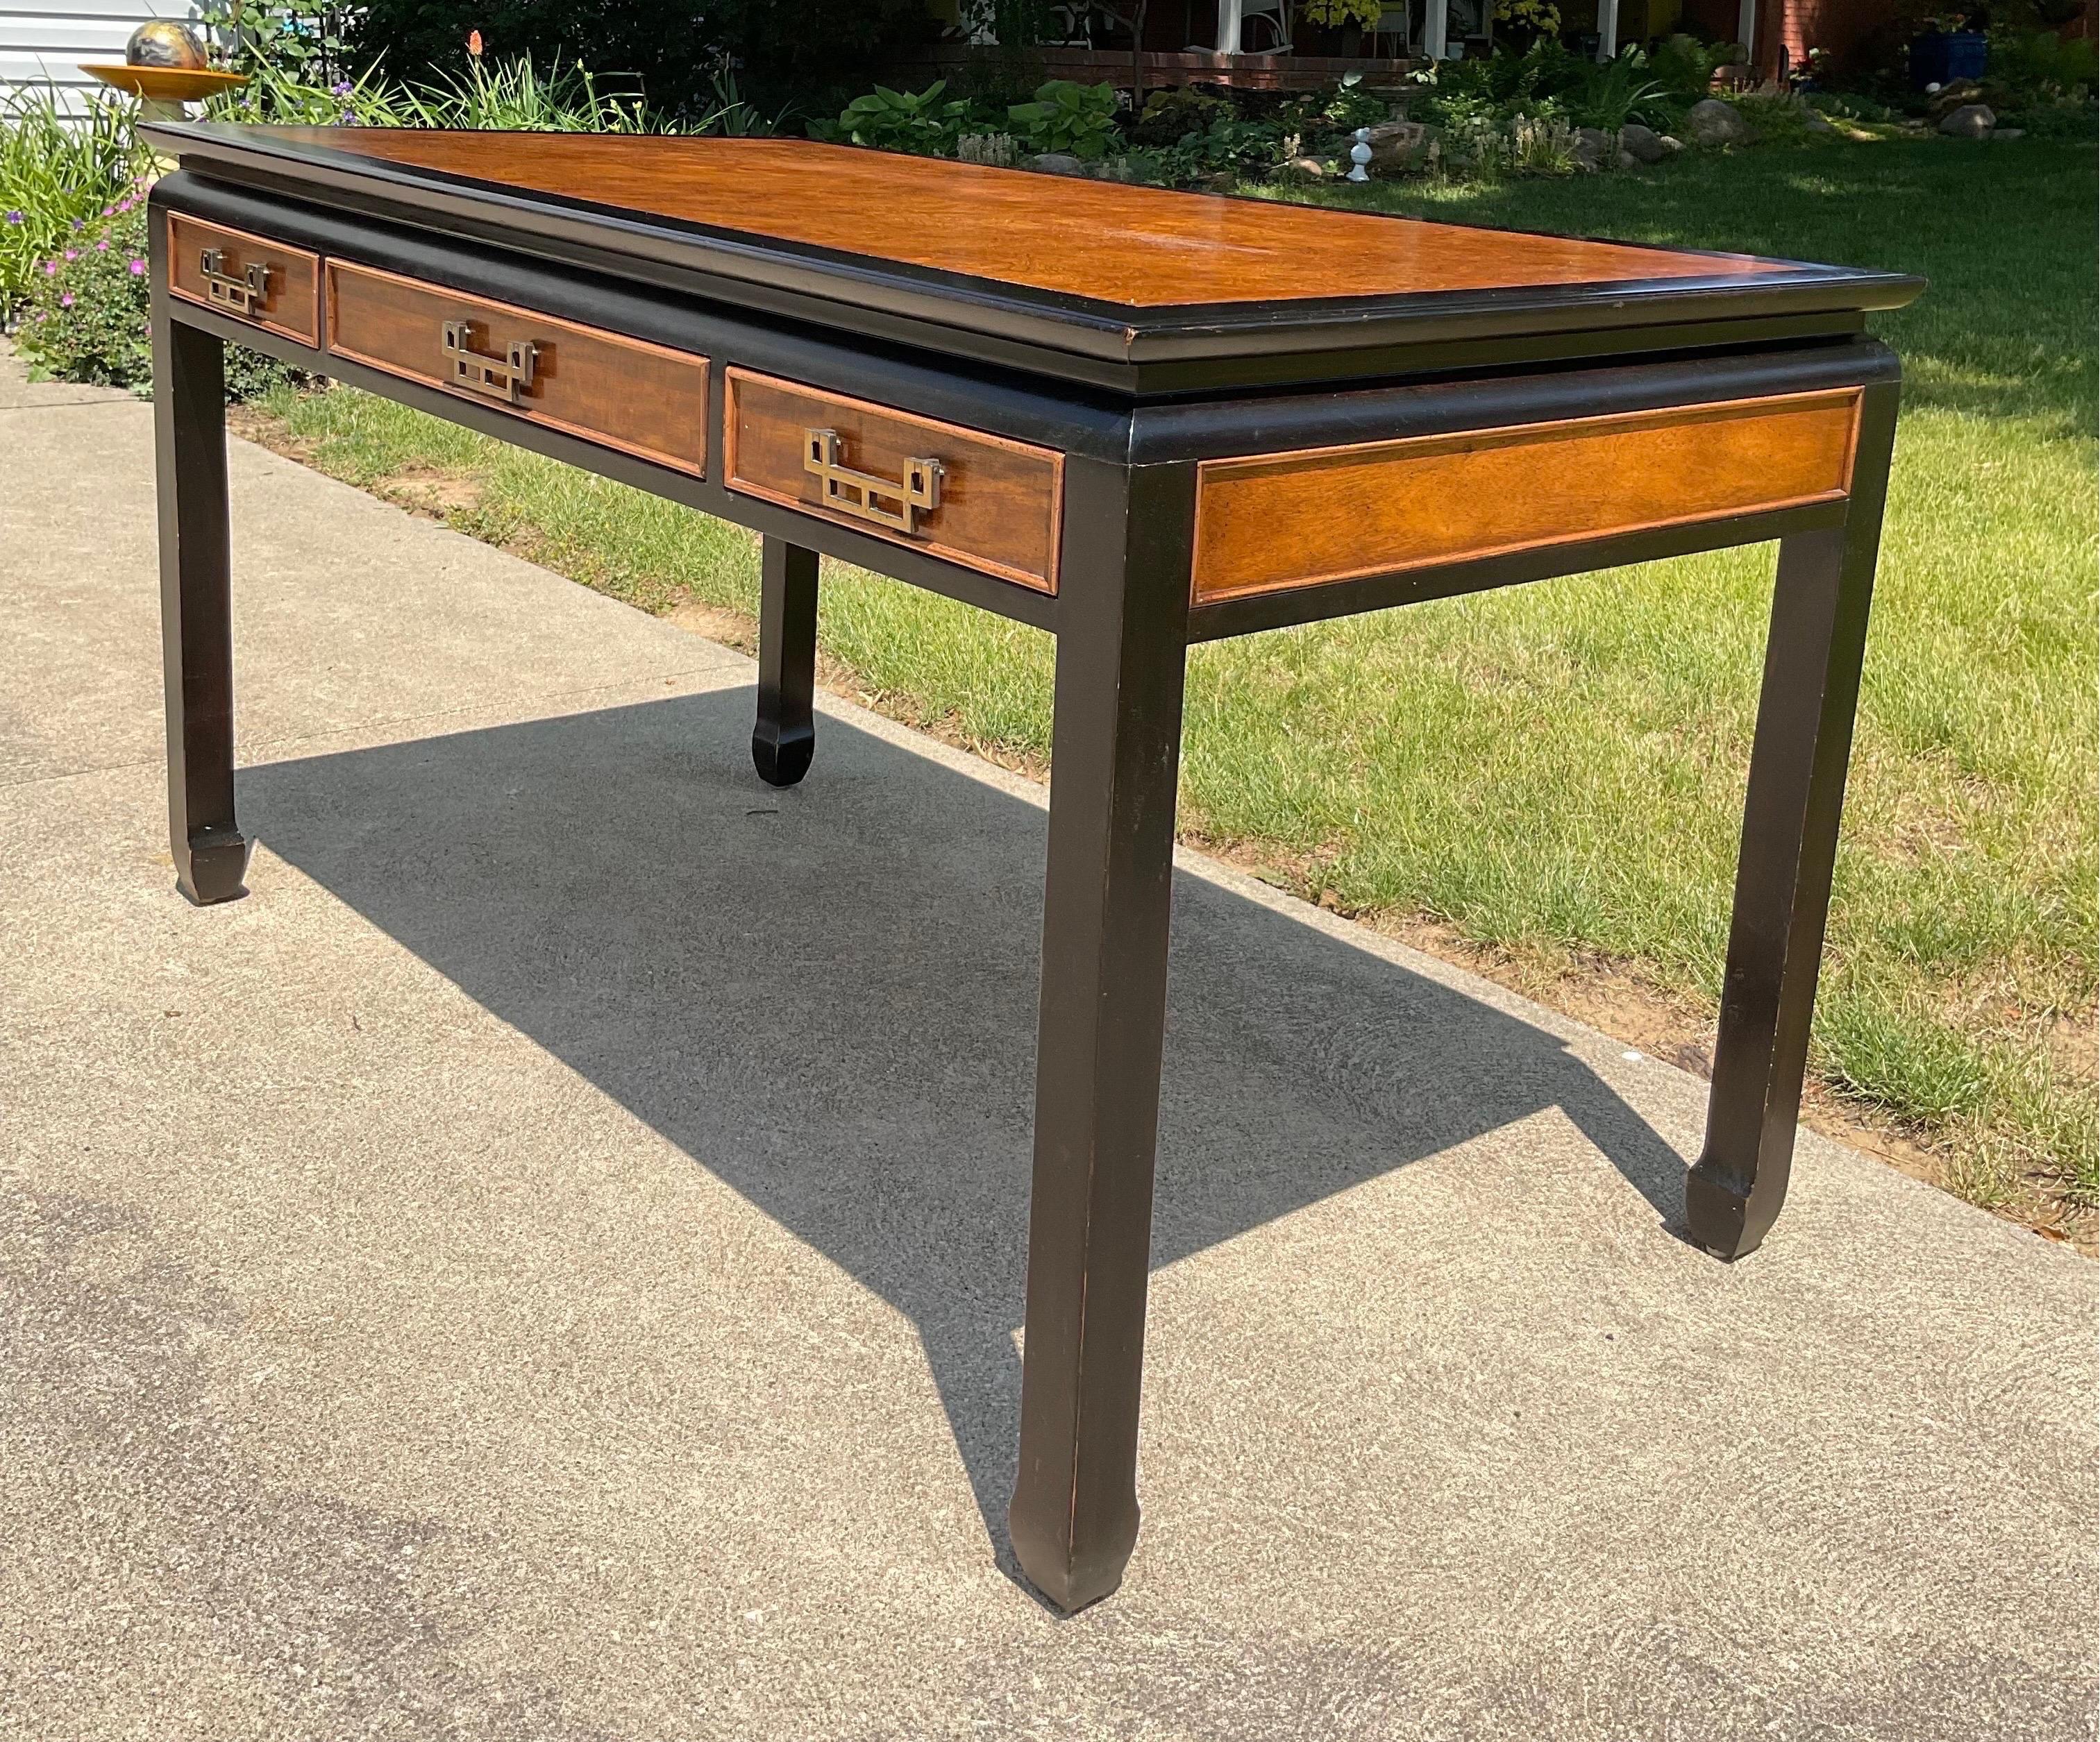 North American 1970s Writing Desk From Century Furniture’s Chin Hua Collection by Raymond Sobot